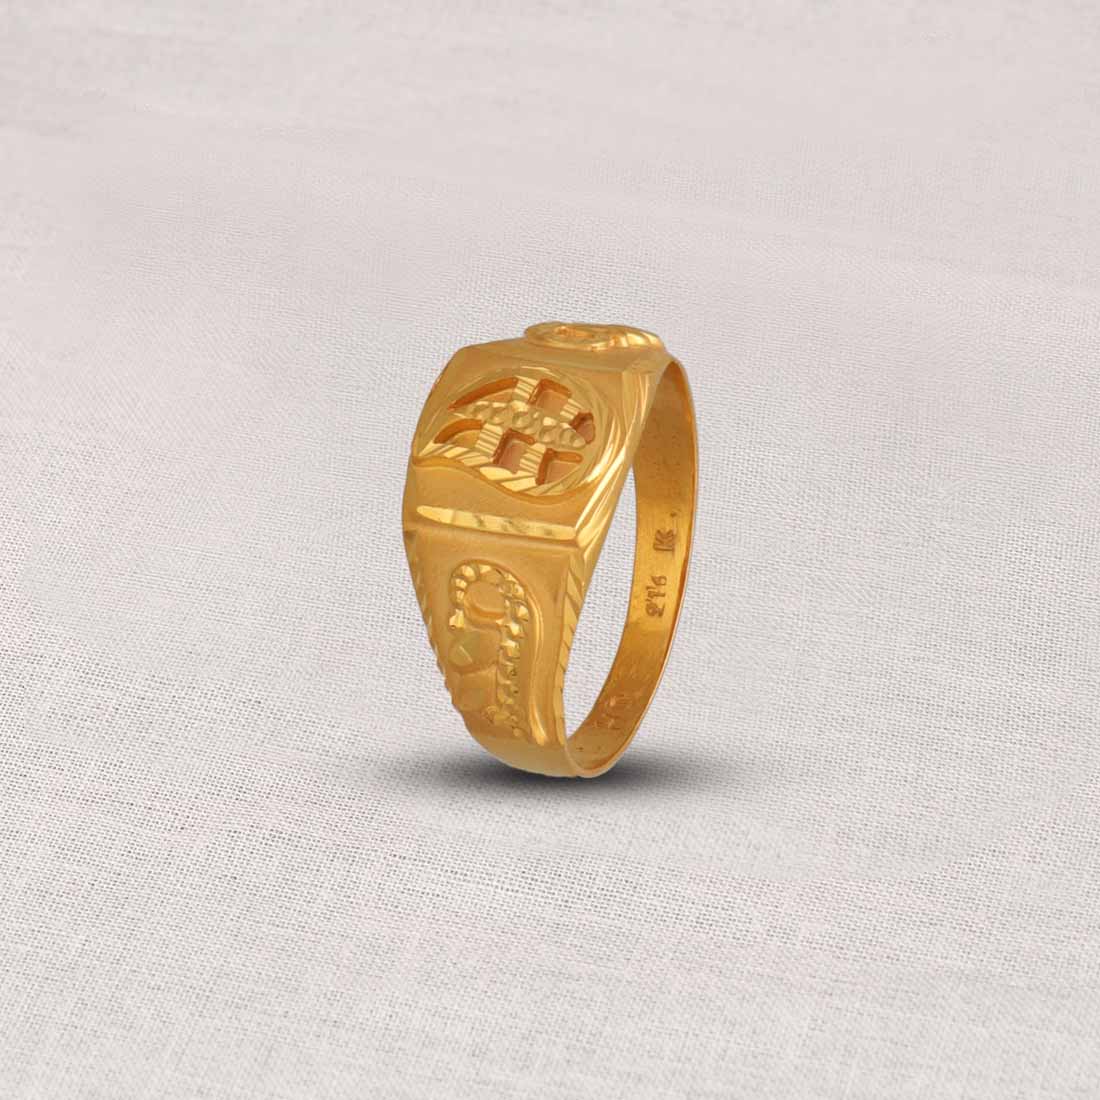 Amazon.com: Roman Numeral Date Ring Anniversary Gift for him Gold Filled  Band Gift for Husband Custom Anniversary Ring : Handmade Products